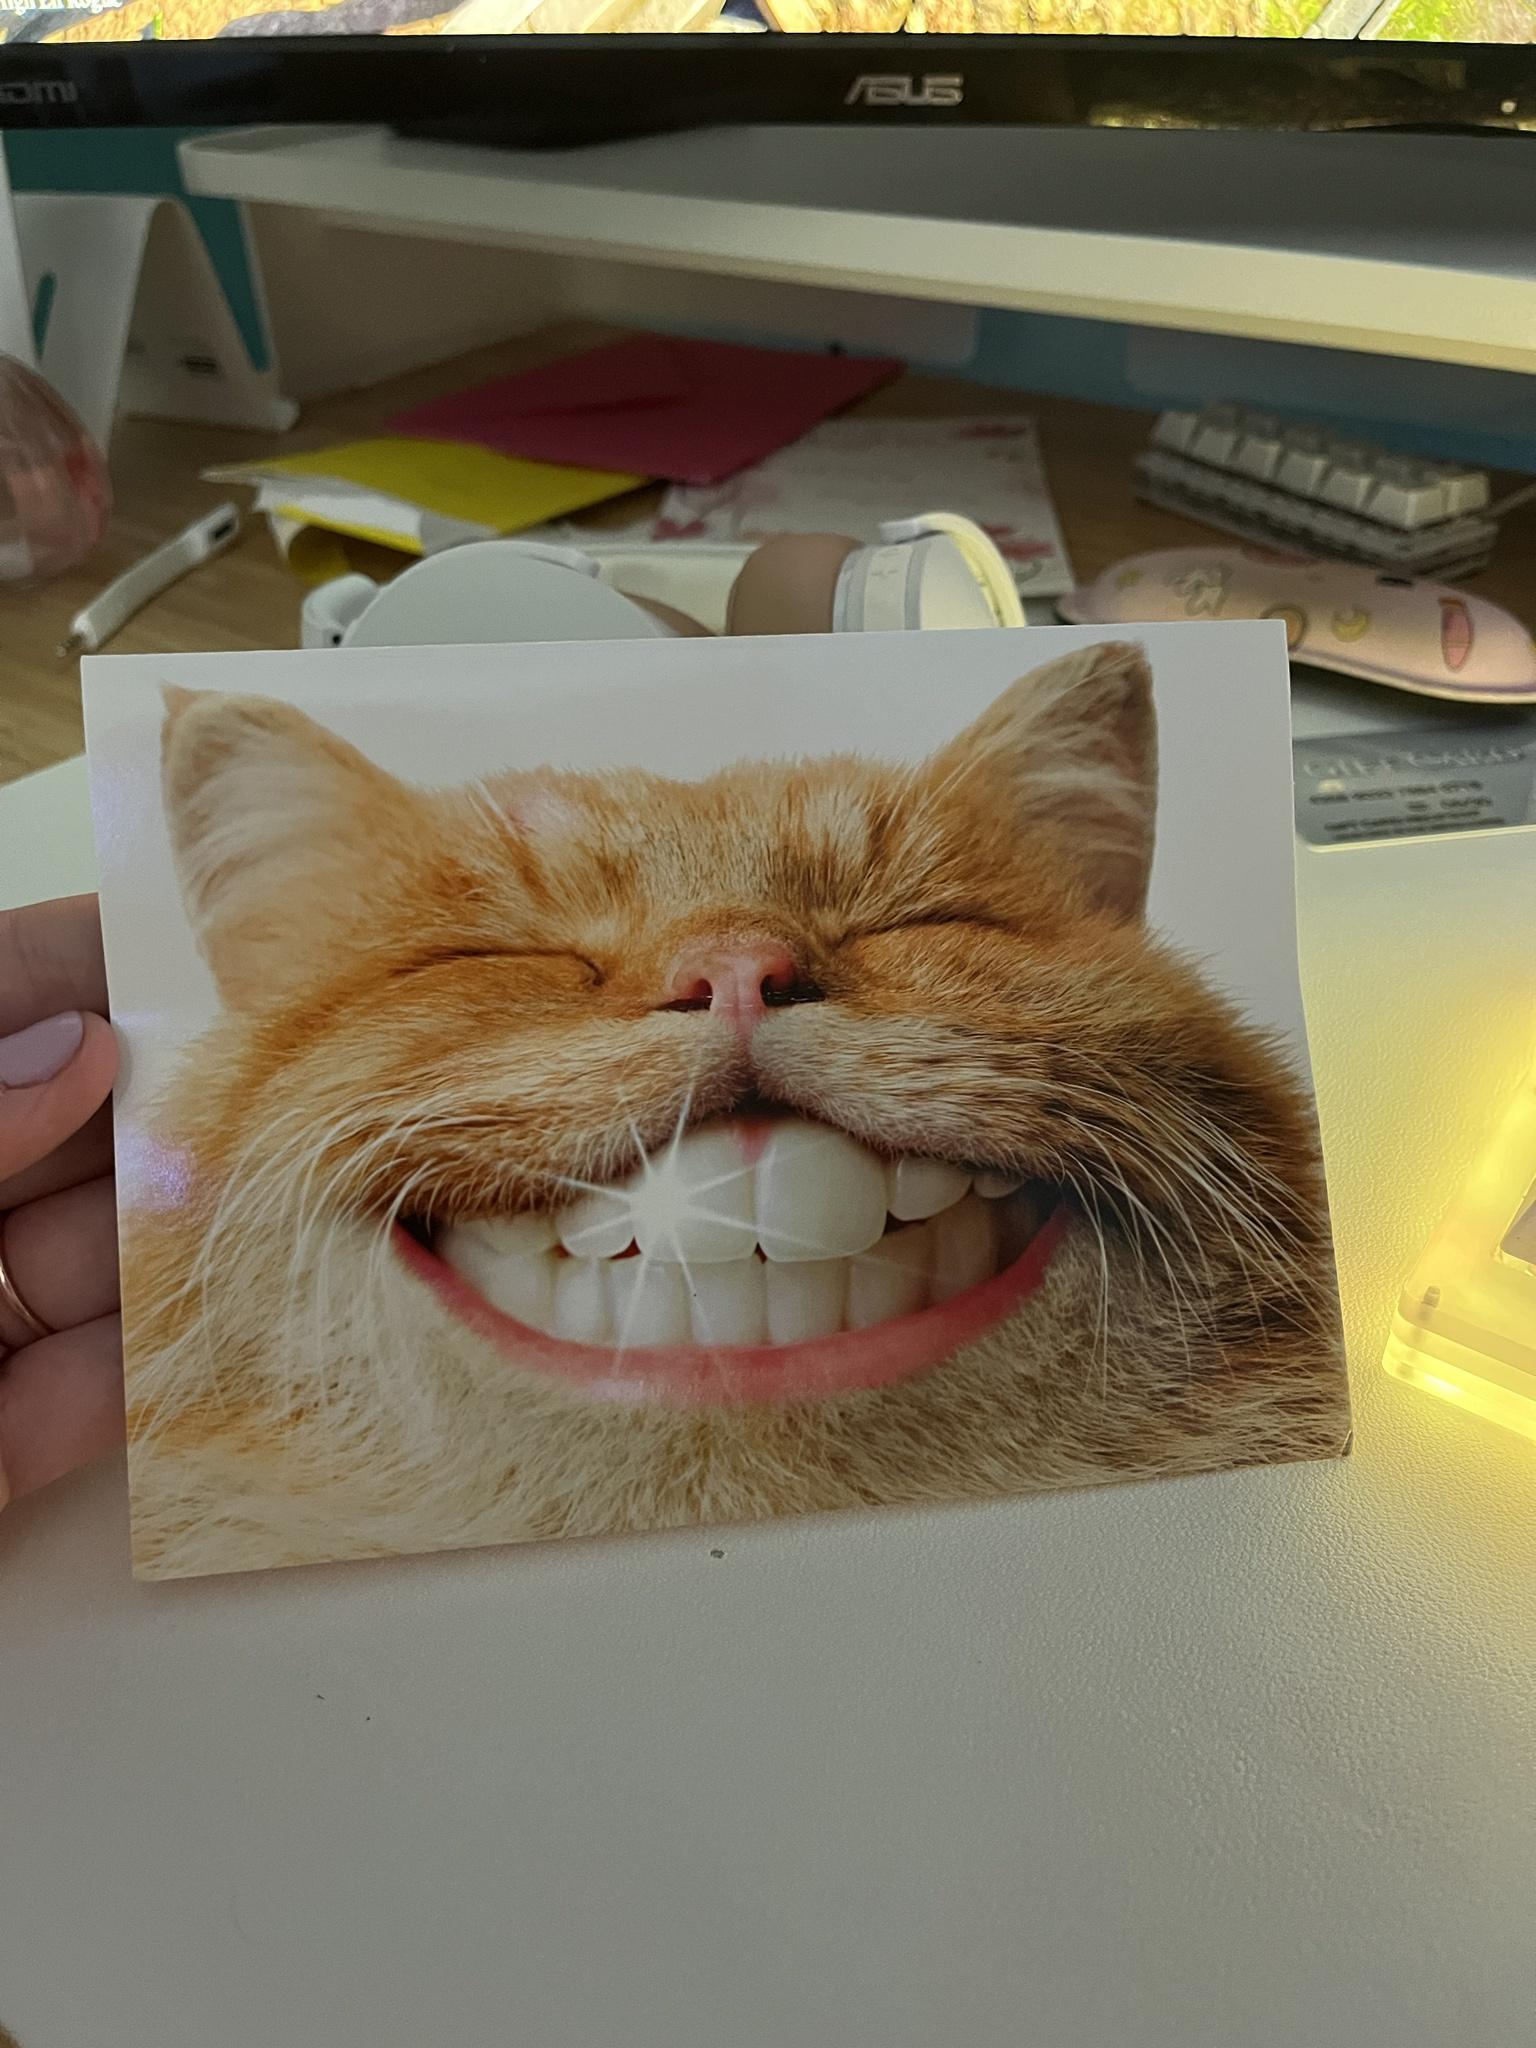 My grandmother despatched my cat a card